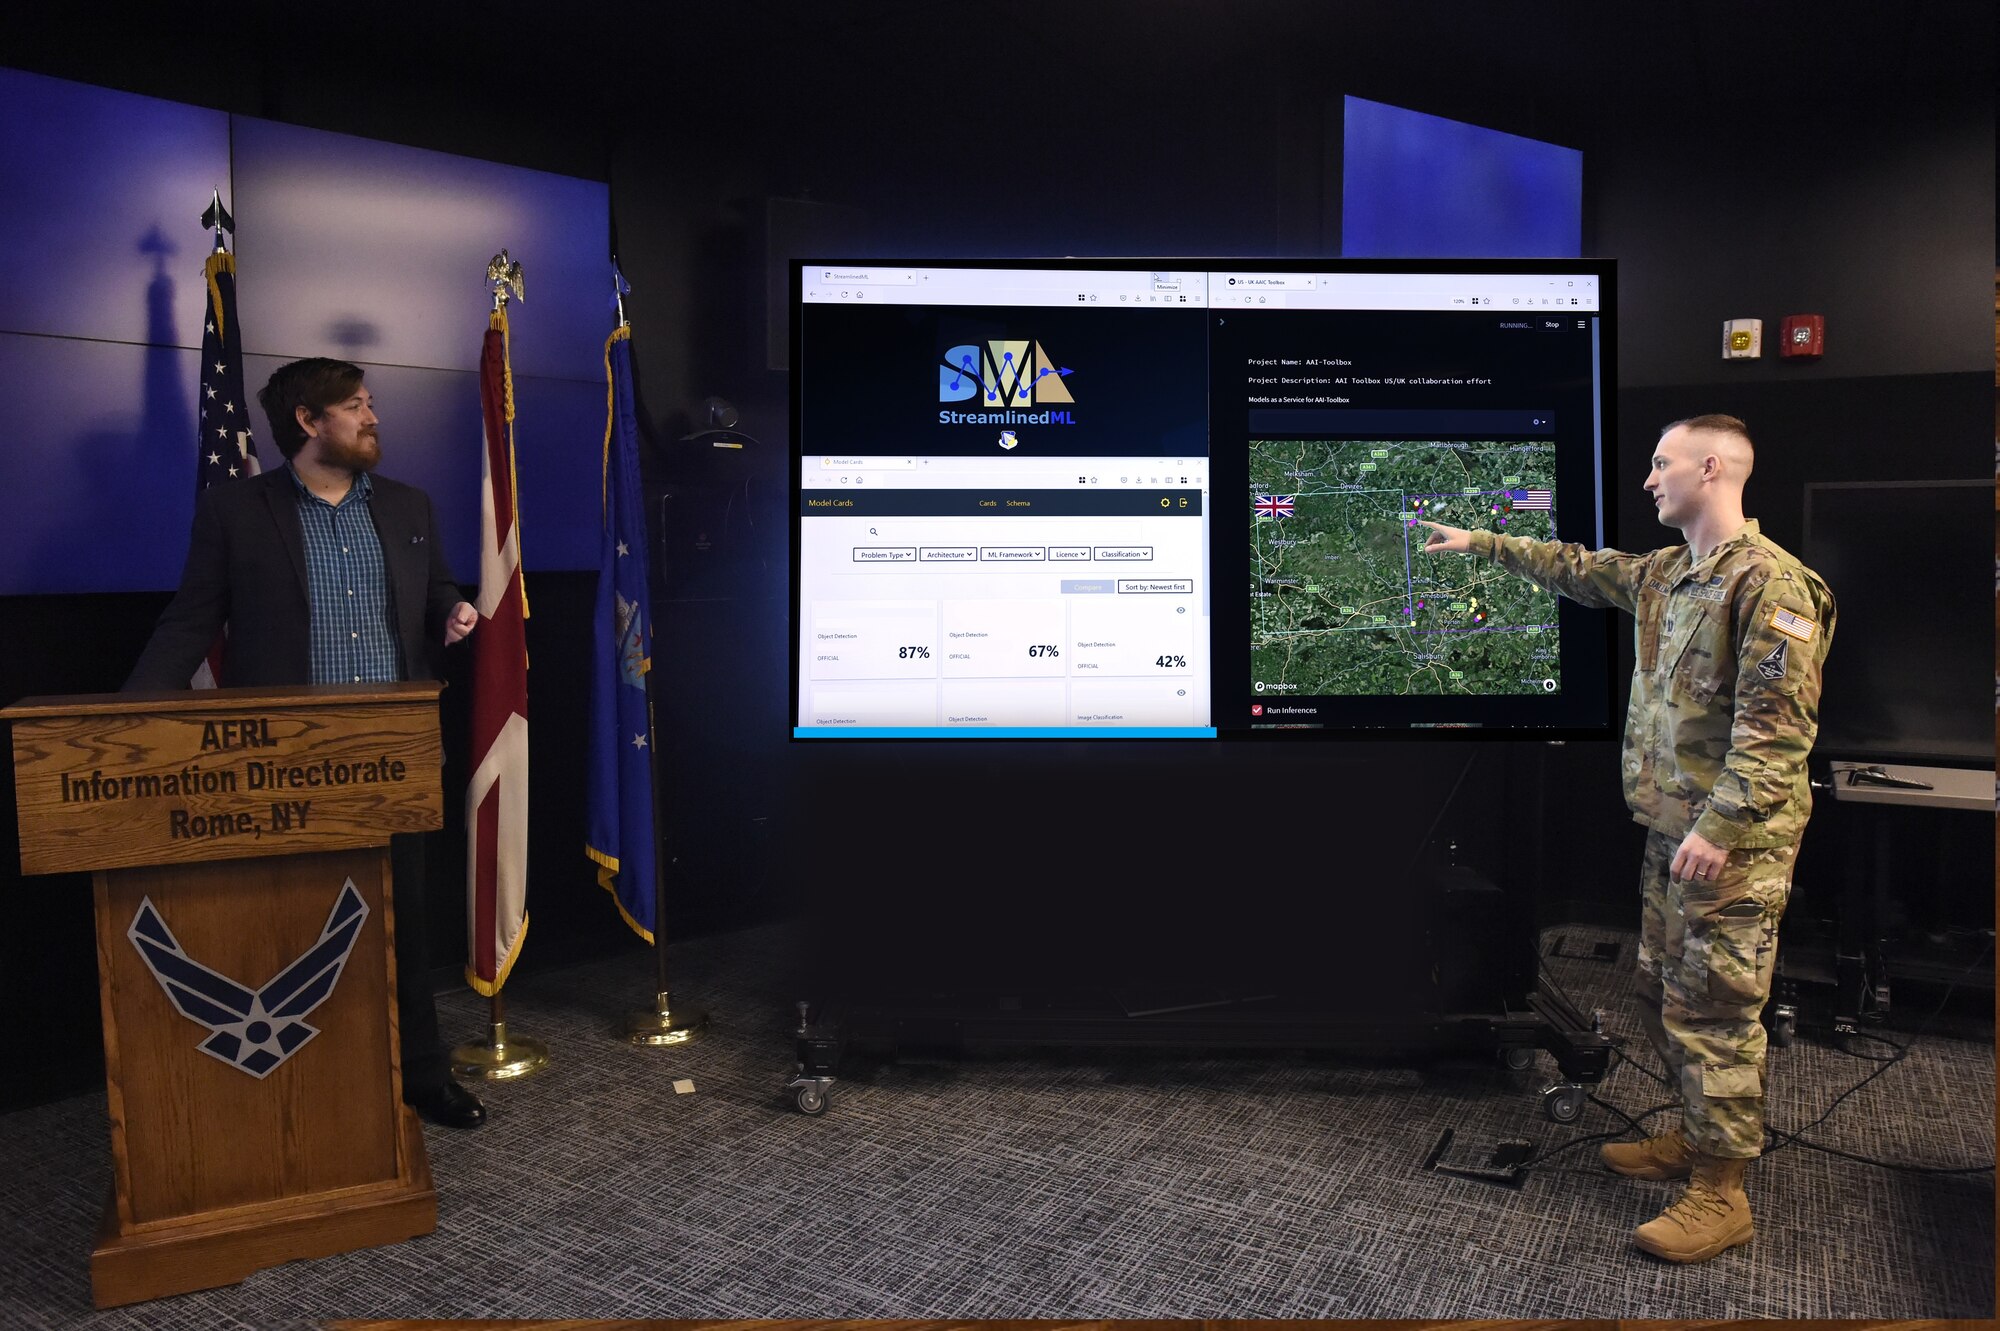 U.S. participants, Air Force Capt. William Dallmann and Cody Kearse of the Air Force Research Laboratory’s Information Directorate at Rome, New York, interact with UK and U.S. AI tools during the virtual demonstration as part of the UK and U.S. collaboration for accelerating AI development, Oct. 18, 2021. (Courtesy photo)